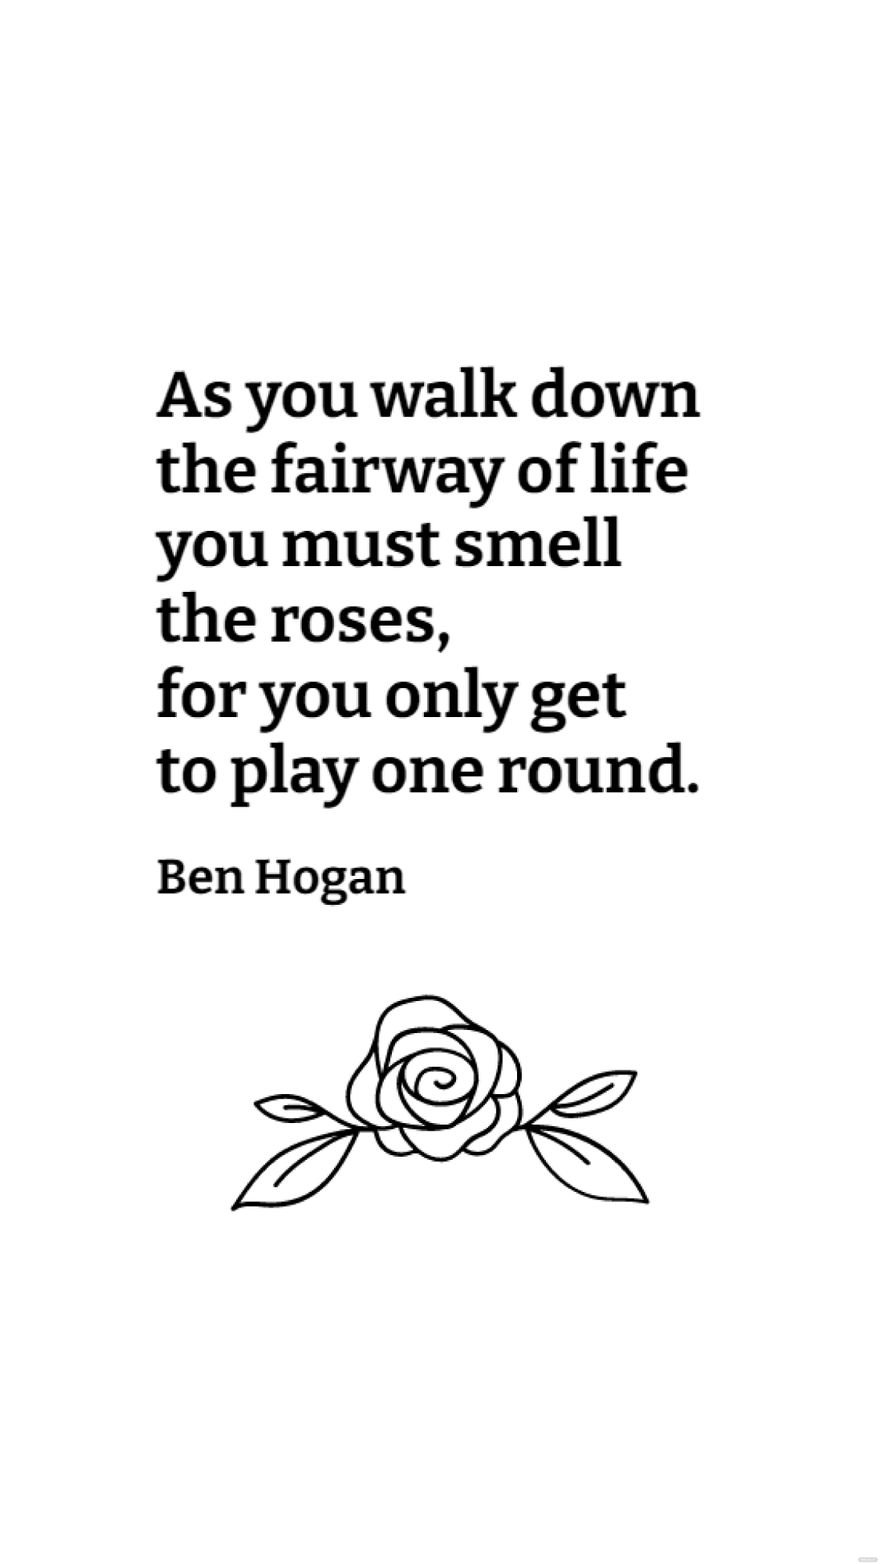 Ben Hogan - As you walk down the fairway of life you must smell the roses, for you only get to play one round. in JPG